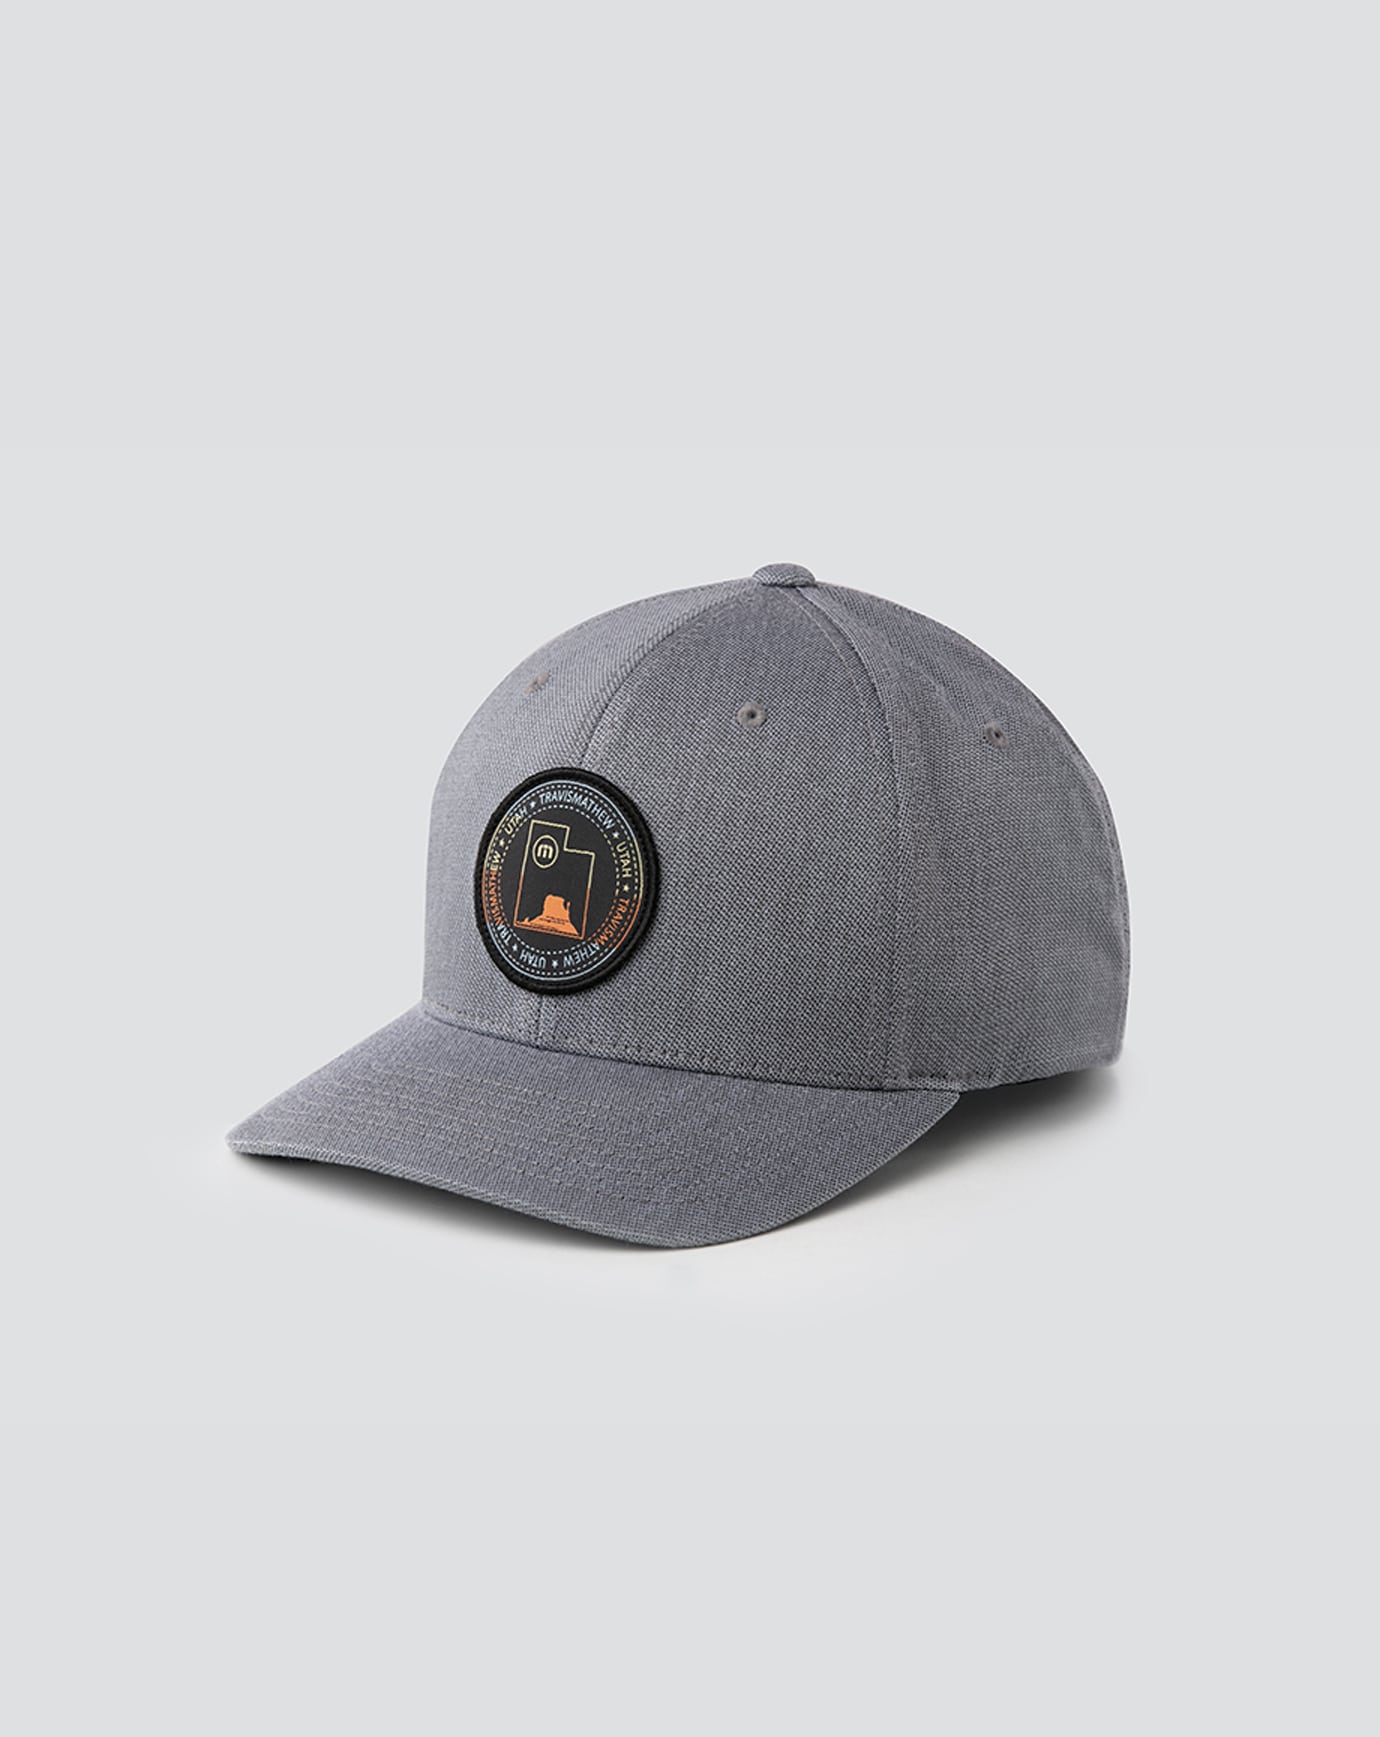 FOUR CORNERS FITTED HAT Image Thumbnail 2